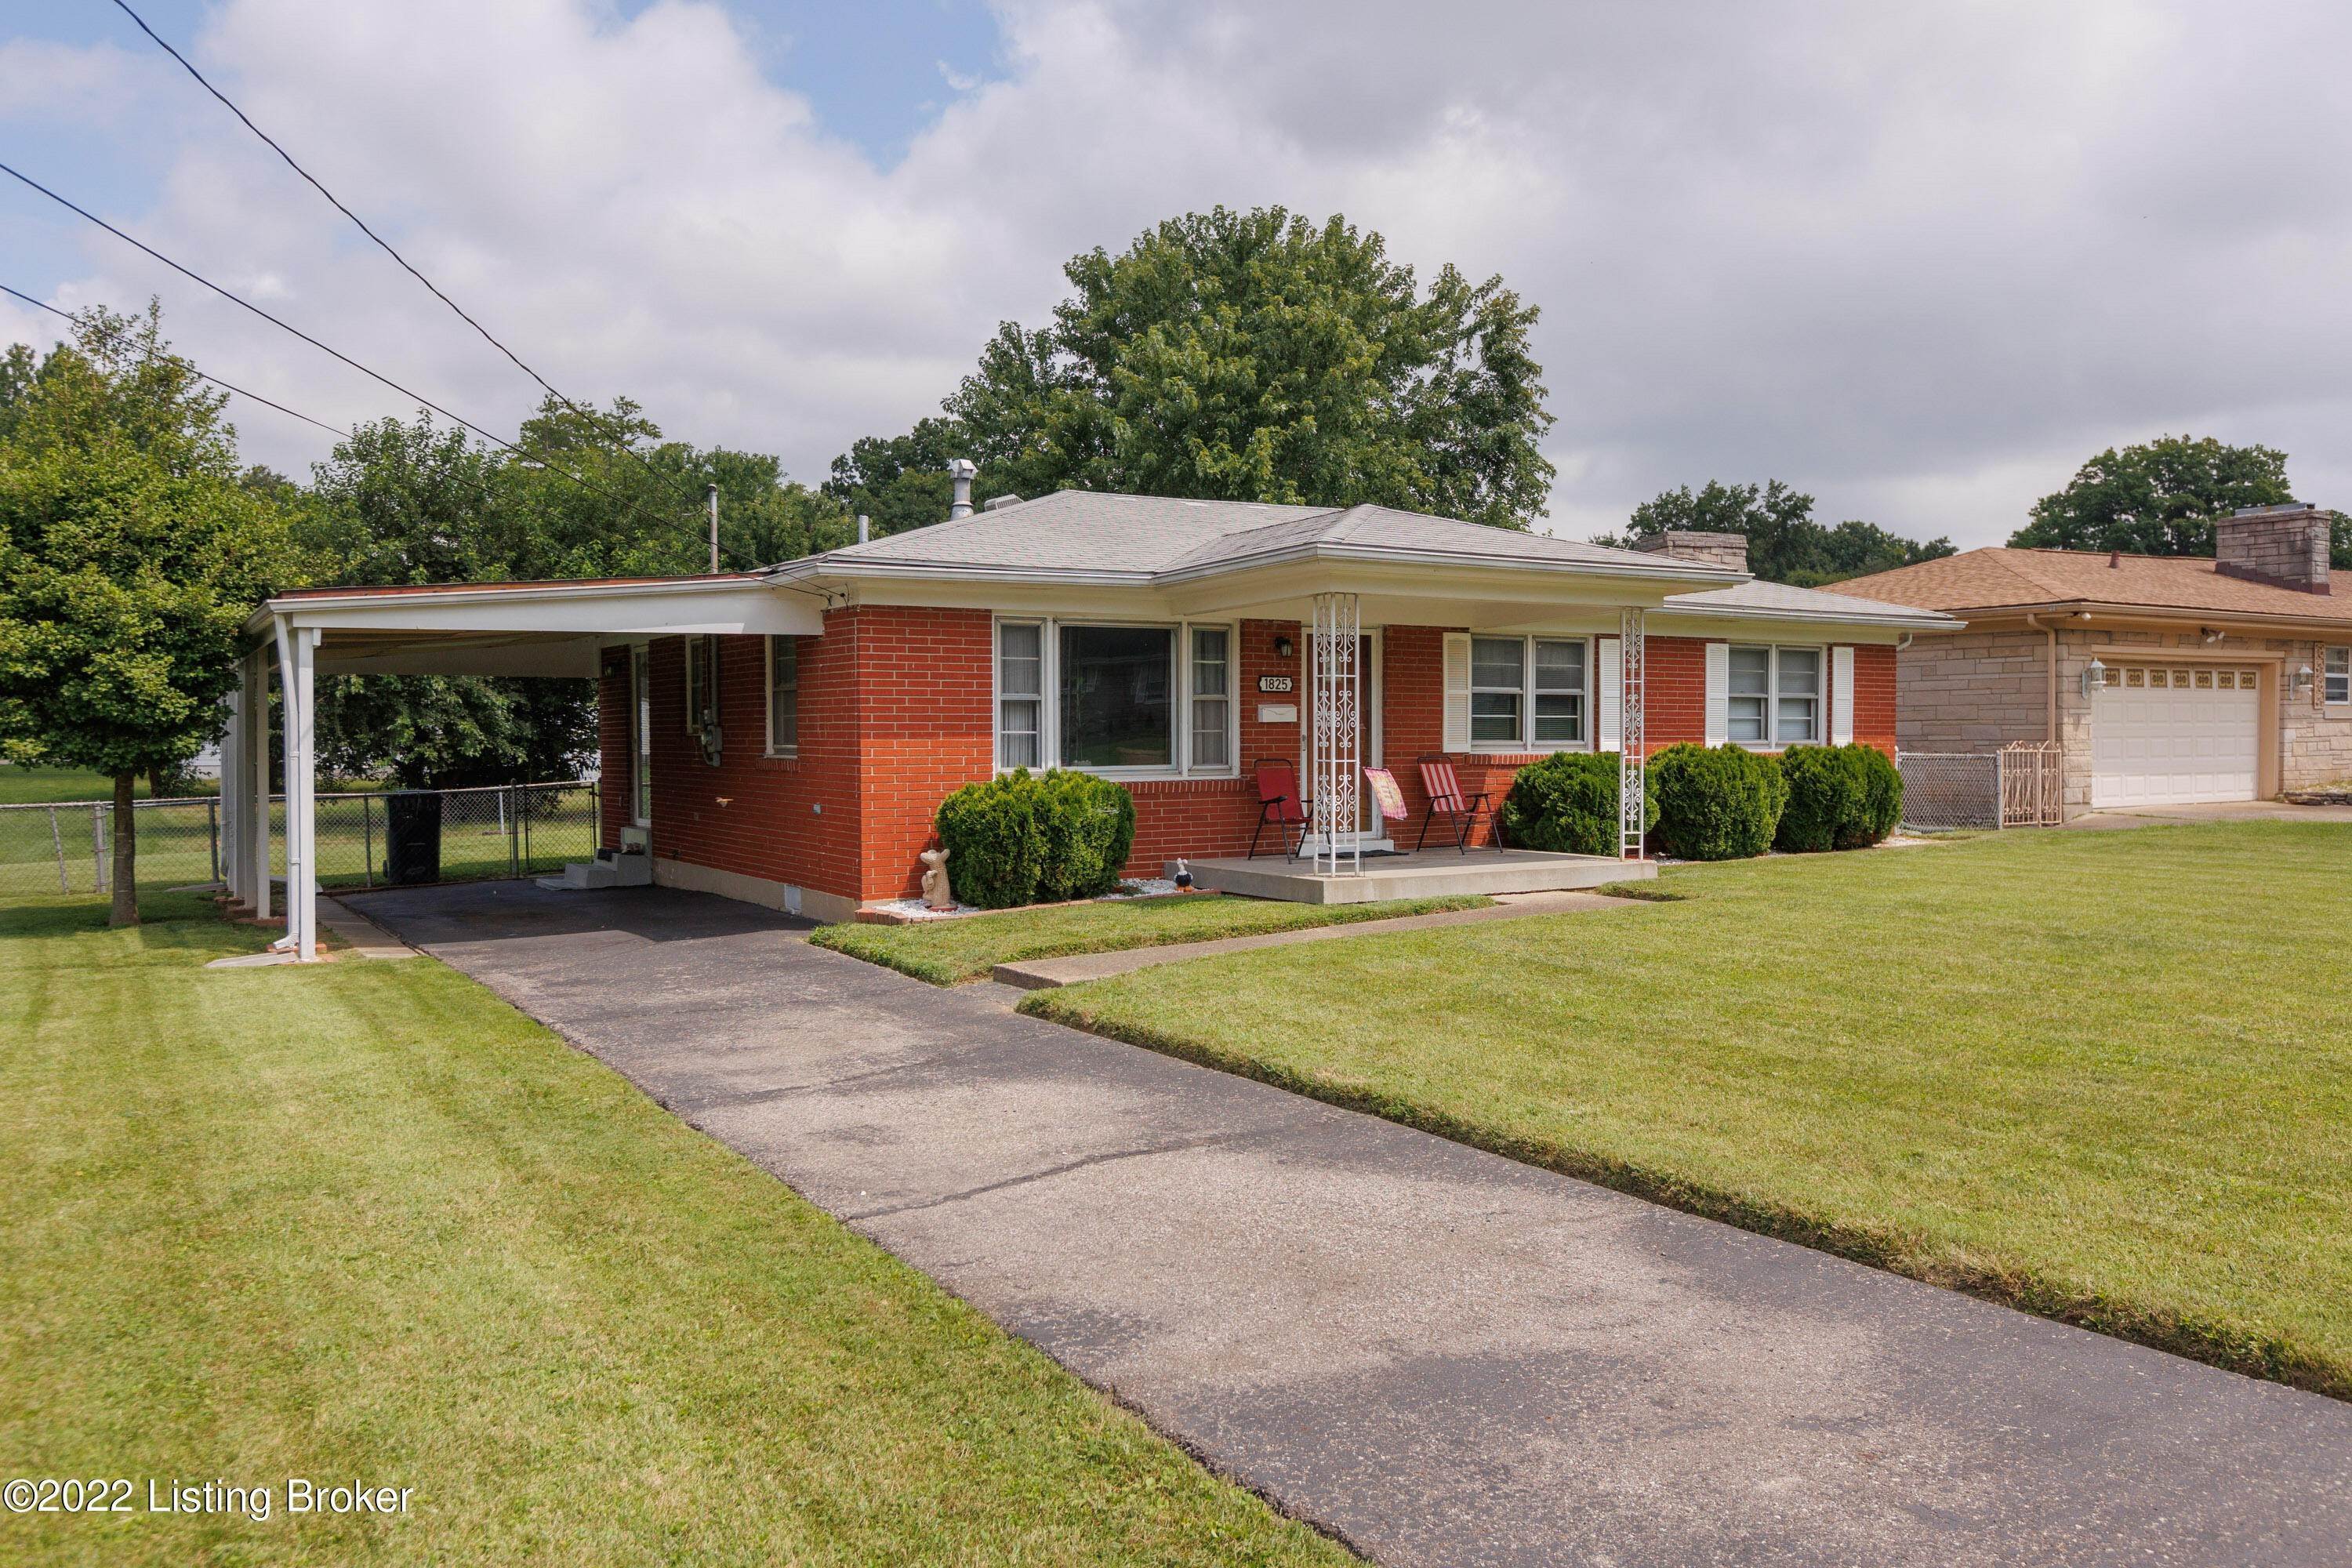 19. Single Family at Louisville, KY 40216